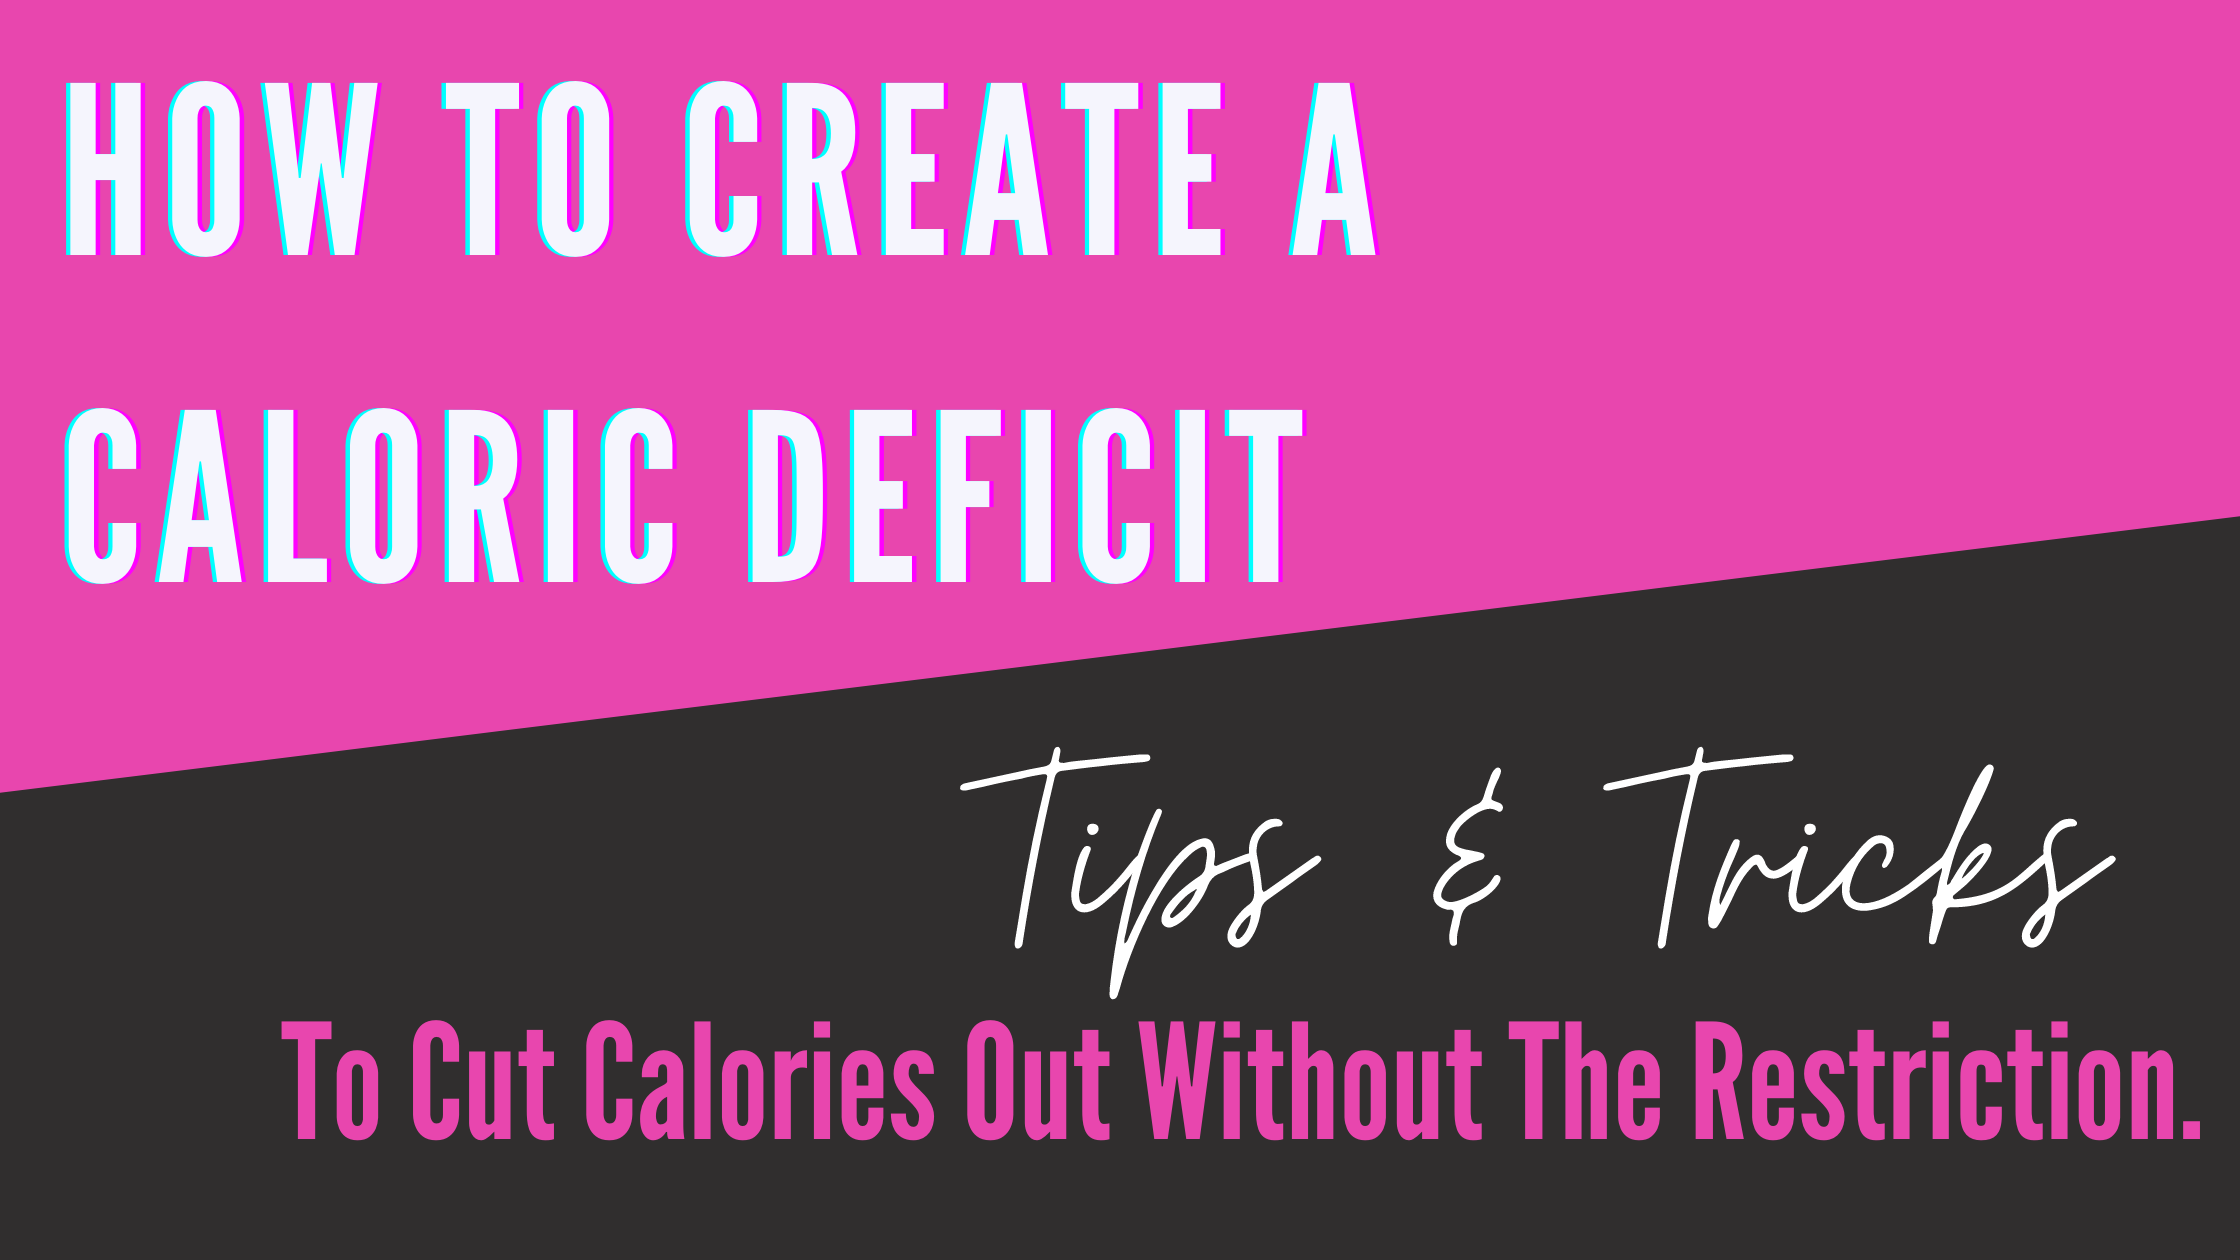 How To Create A Calorie Deficit. Tips & Tricks To Cut Calories Out Without The Restriction